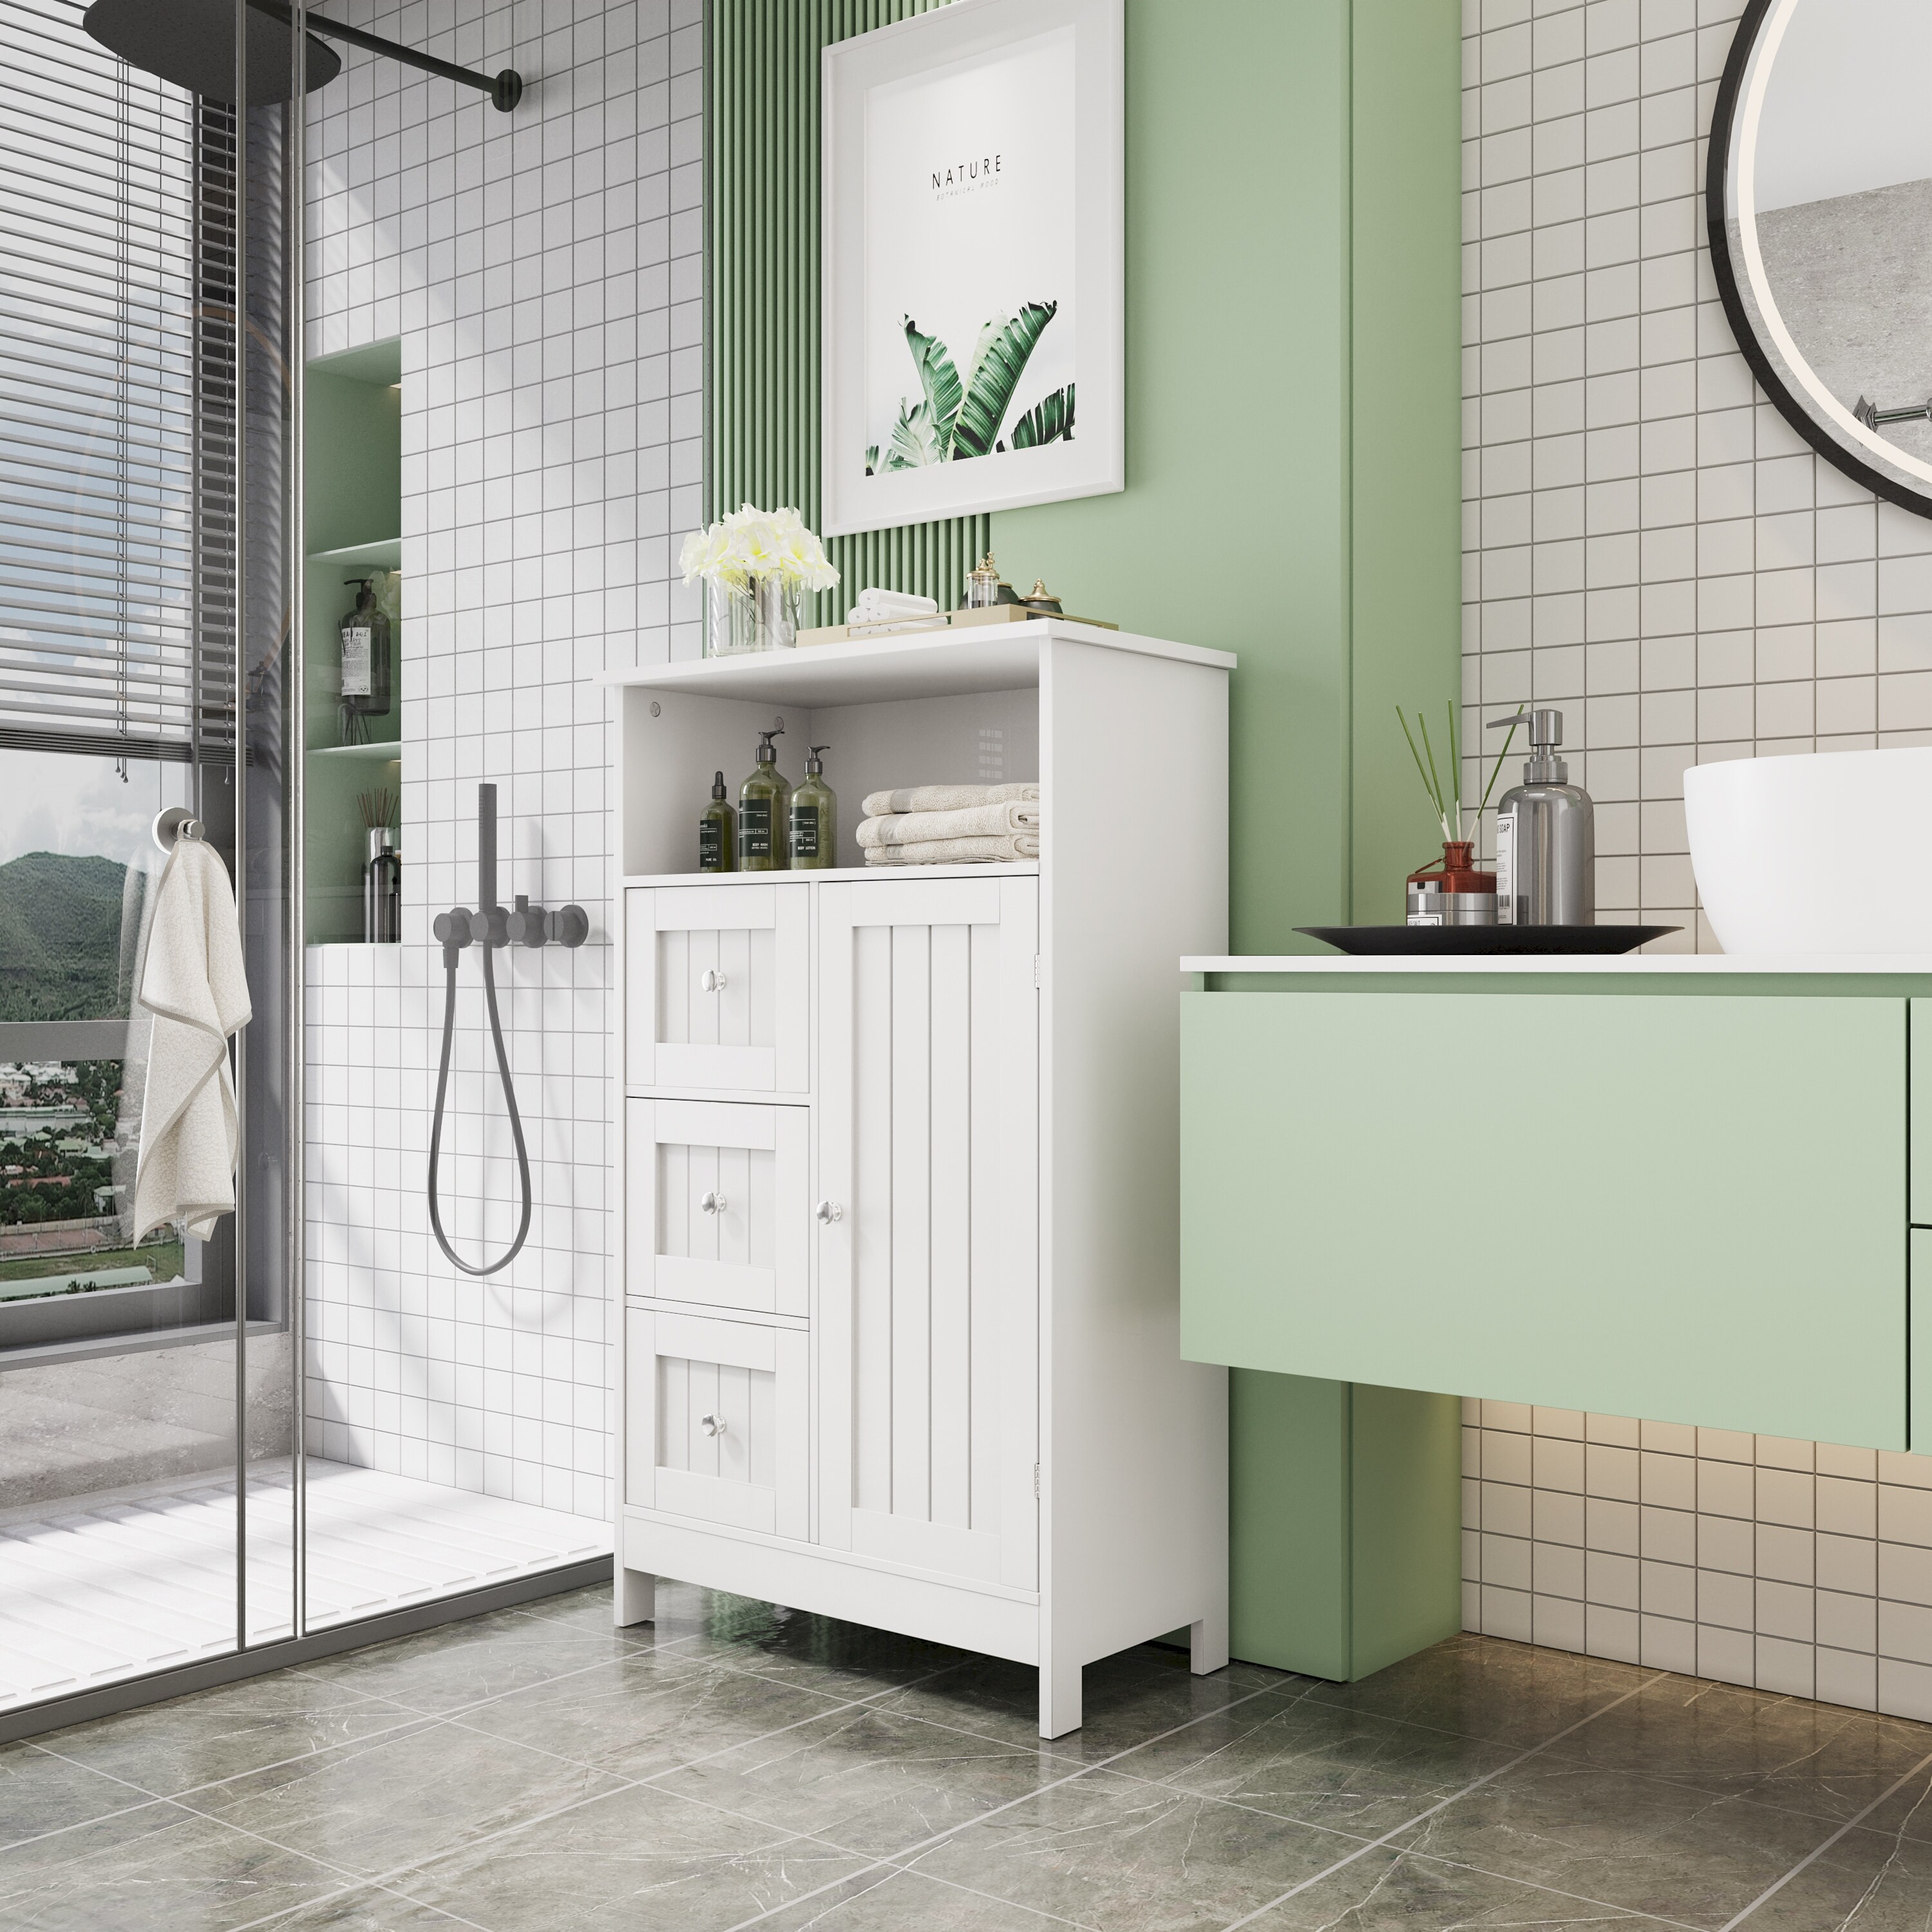 https://ak1.ostkcdn.com/images/products/is/images/direct/8e8d1f780755e33e68b65c0996c2c2b2918e6f20/Bathroom-standing-storage-cabinet.jpg